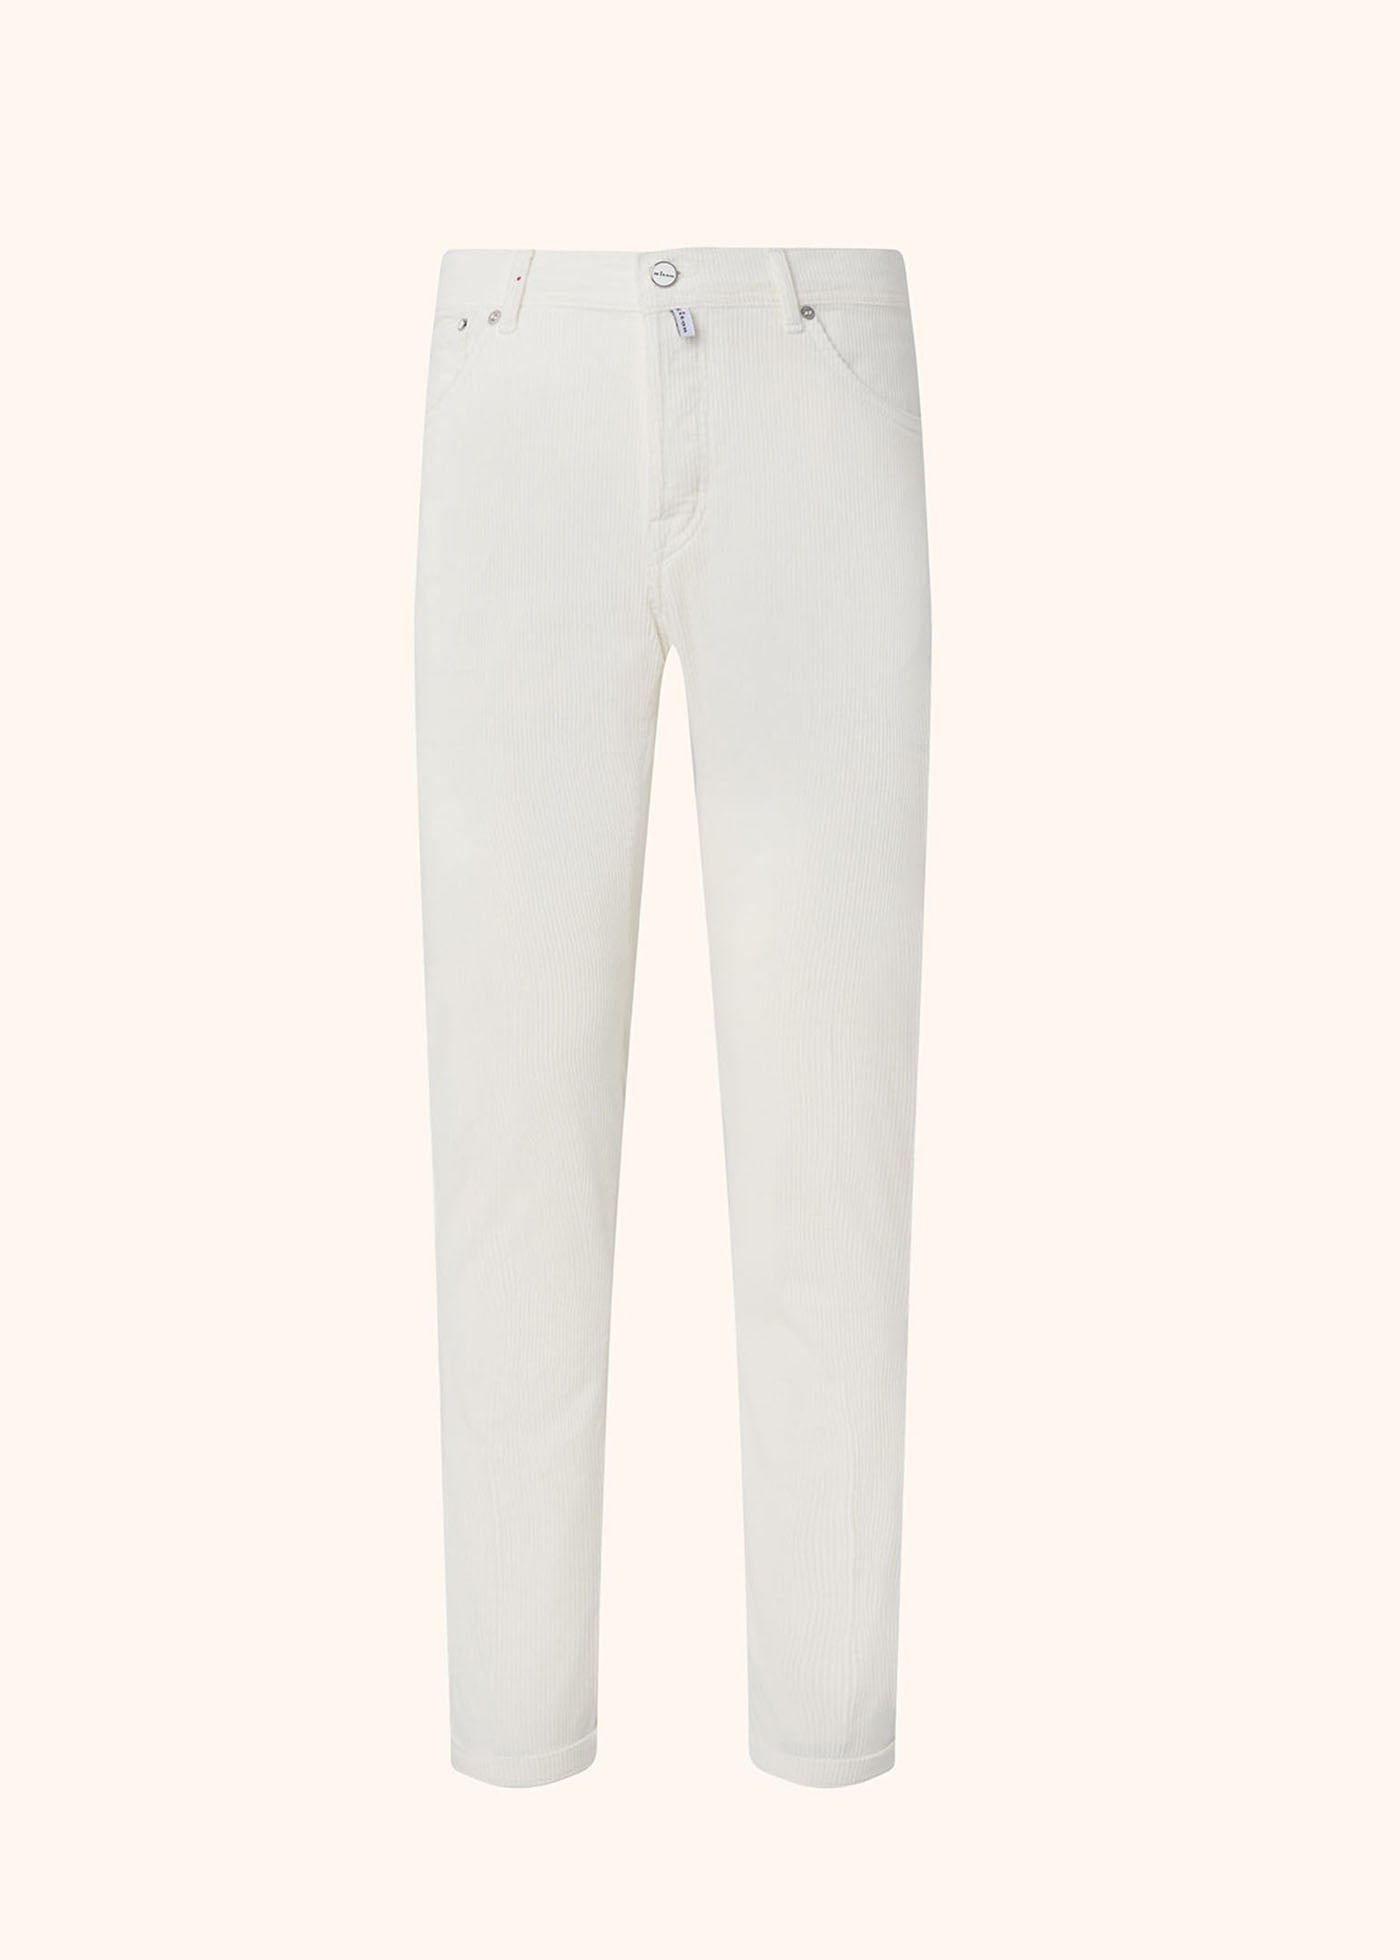 New Arrival Cotton jeans pants in Skin Color with Dashing Quality